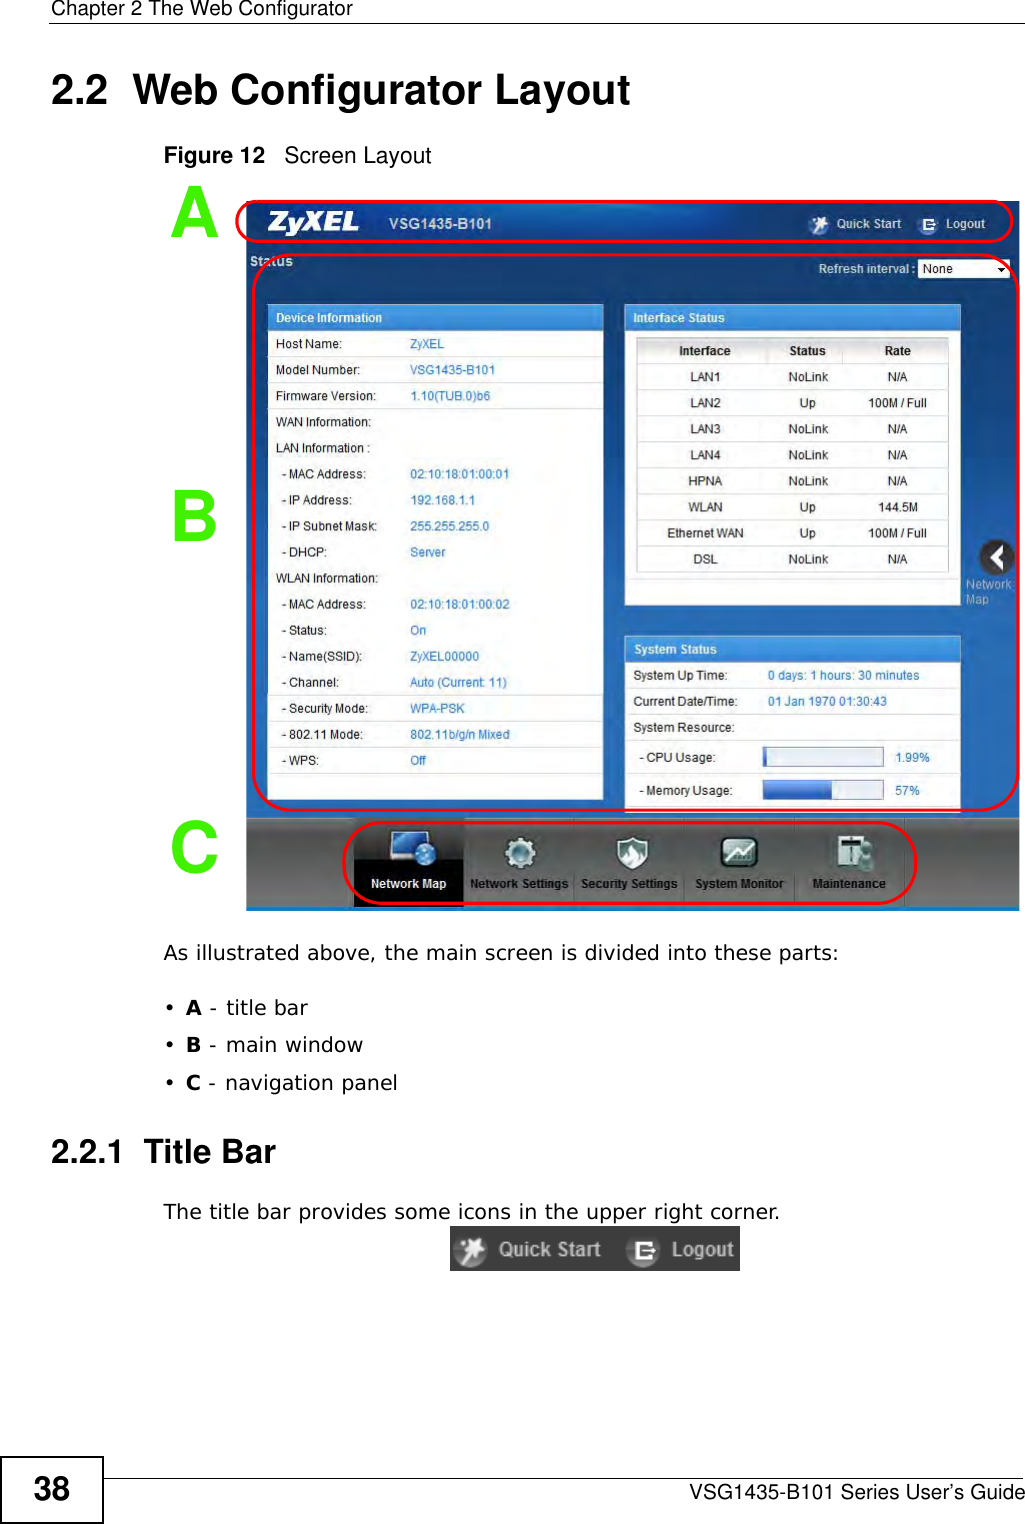 Chapter 2 The Web ConfiguratorVSG1435-B101 Series User’s Guide382.2  Web Configurator LayoutFigure 12   Screen LayoutAs illustrated above, the main screen is divided into these parts:•A - title bar•B - main window •C - navigation panel2.2.1  Title BarThe title bar provides some icons in the upper right corner.BCA